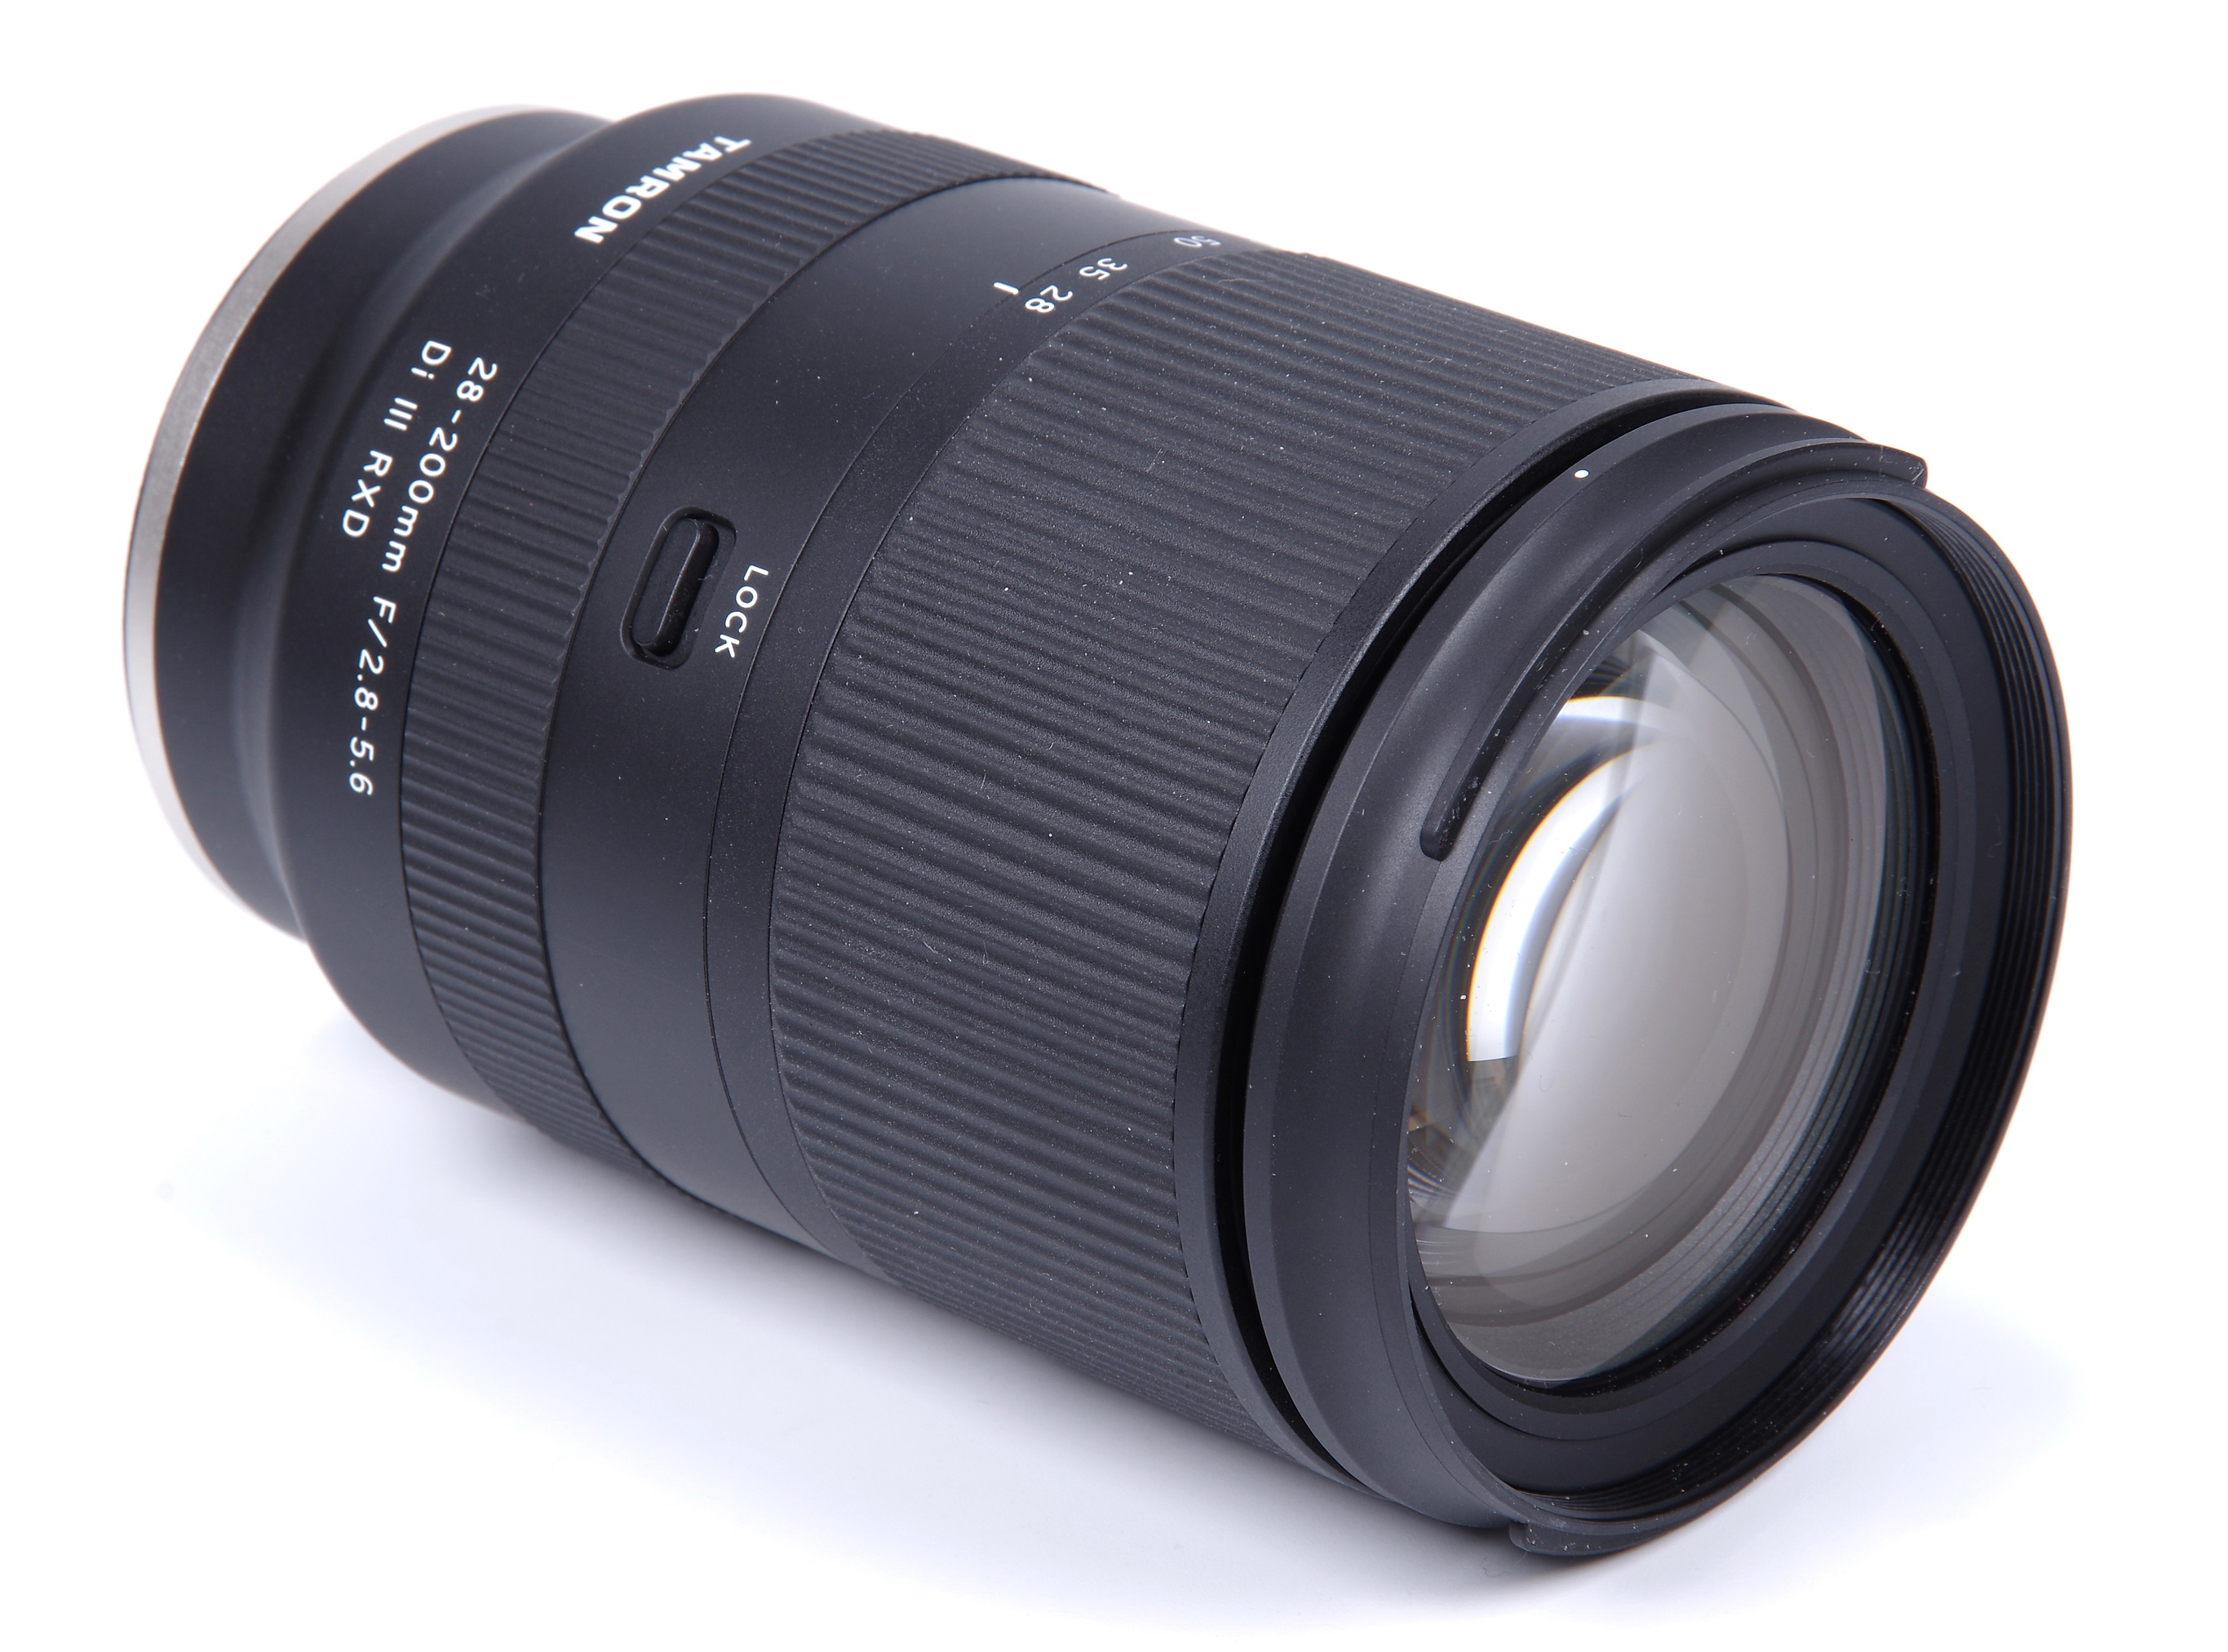 Tamron 28-200mm f/2.8-5.6 Di III RXD Review